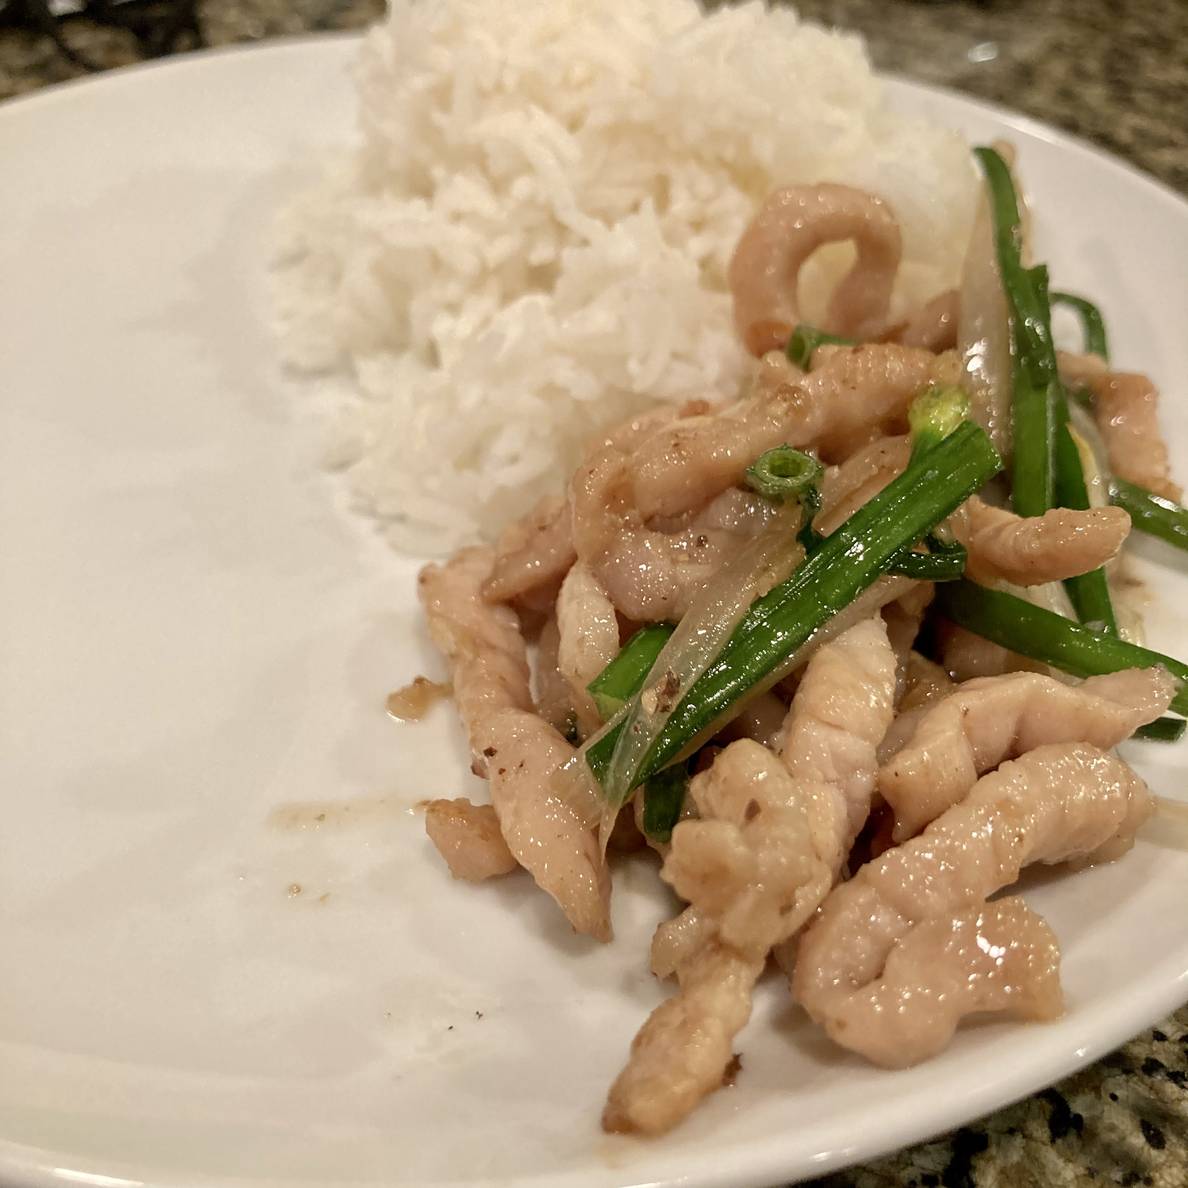 A plate on a counter has some rice out of focus in the background and some stir-fried pork with chives in focus in the foreground.